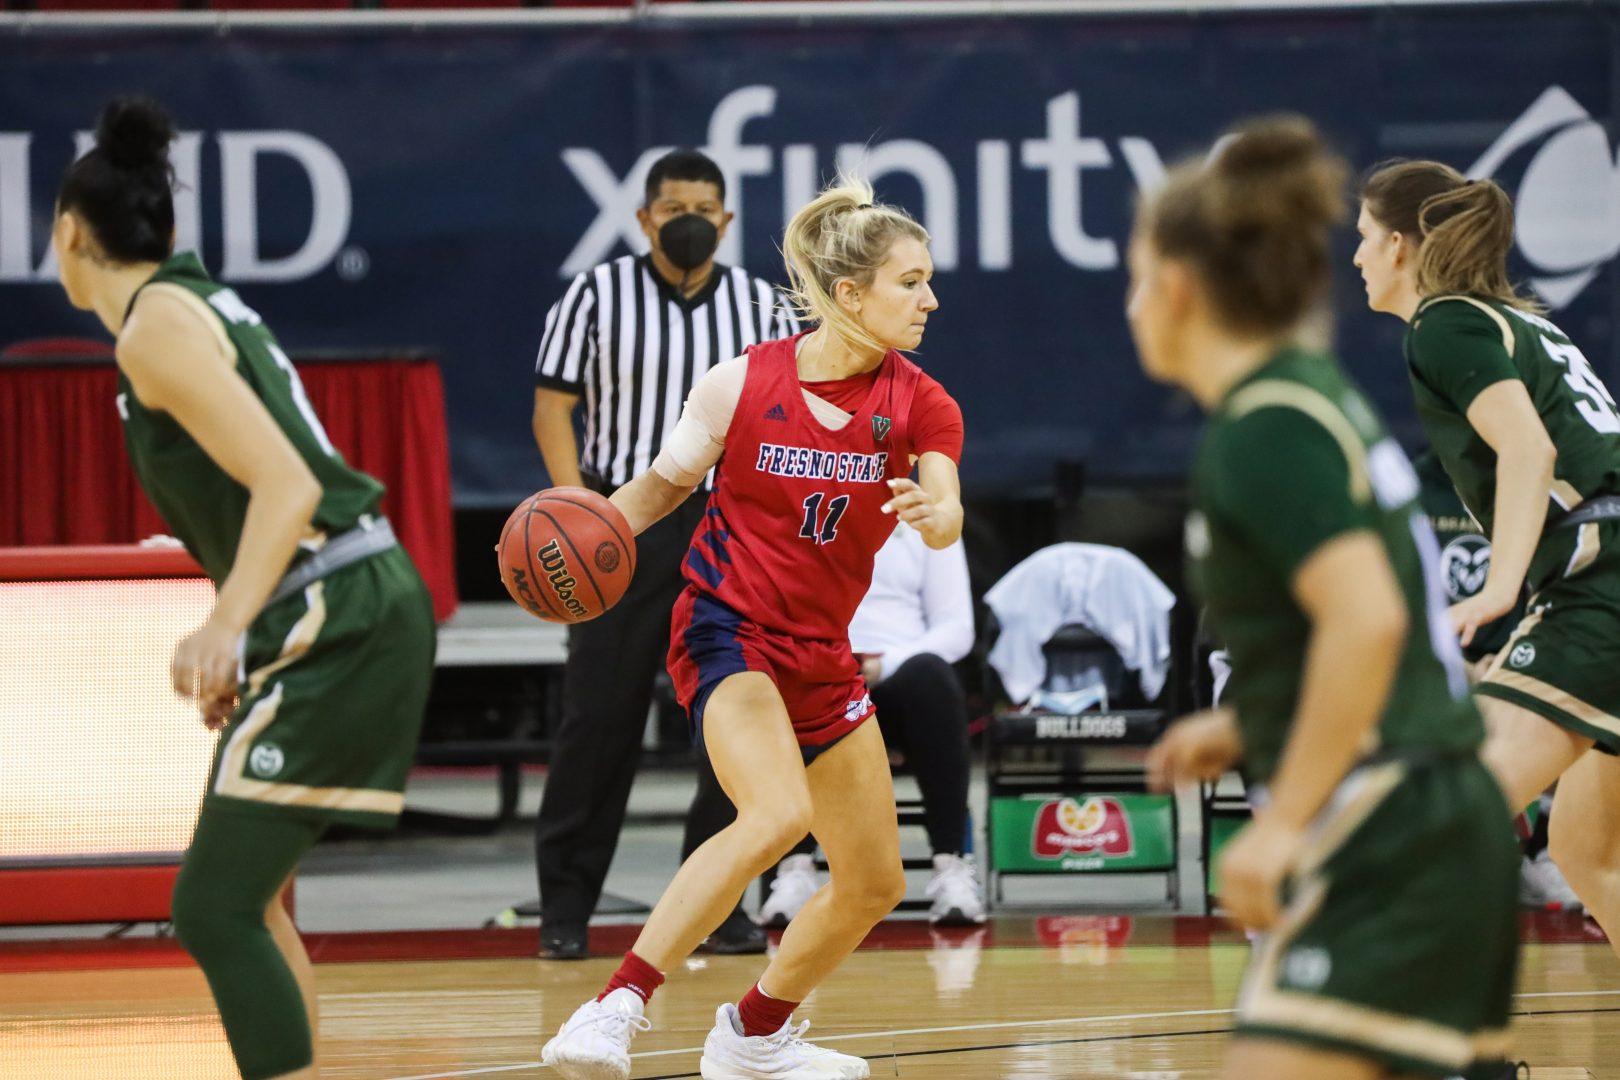 Maddi+Utti+dribbles+the+ball+in+a+game+against+Colorado+State+on+Dec.+3%2C+2020%2C+at+the+Save+Mart+Center.+%28Vendila+Yang%2FThe+Collegian%29.